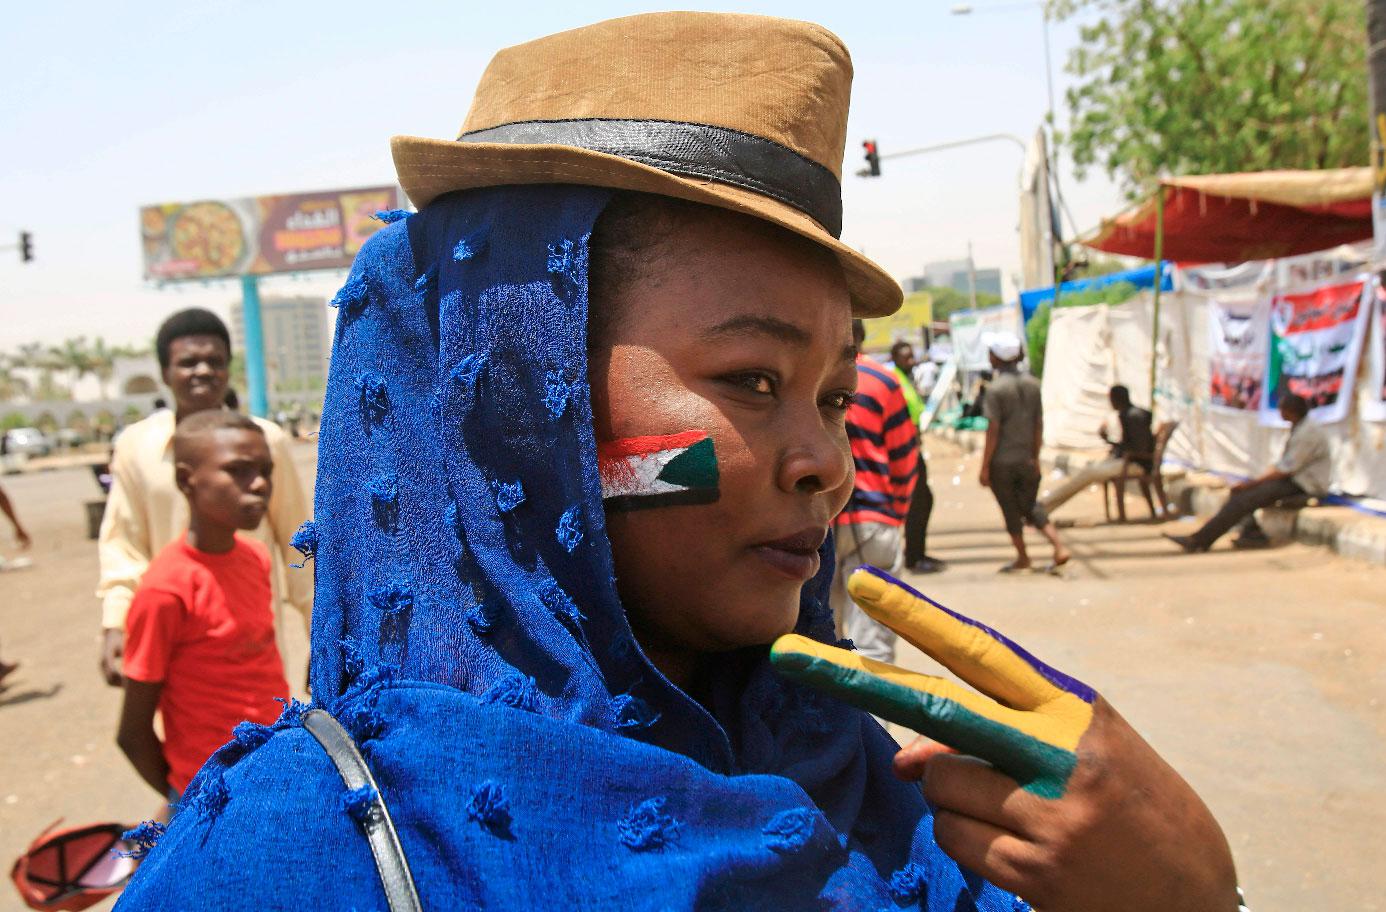 A Sudanese protester with the national flag of Sudan painted on her face